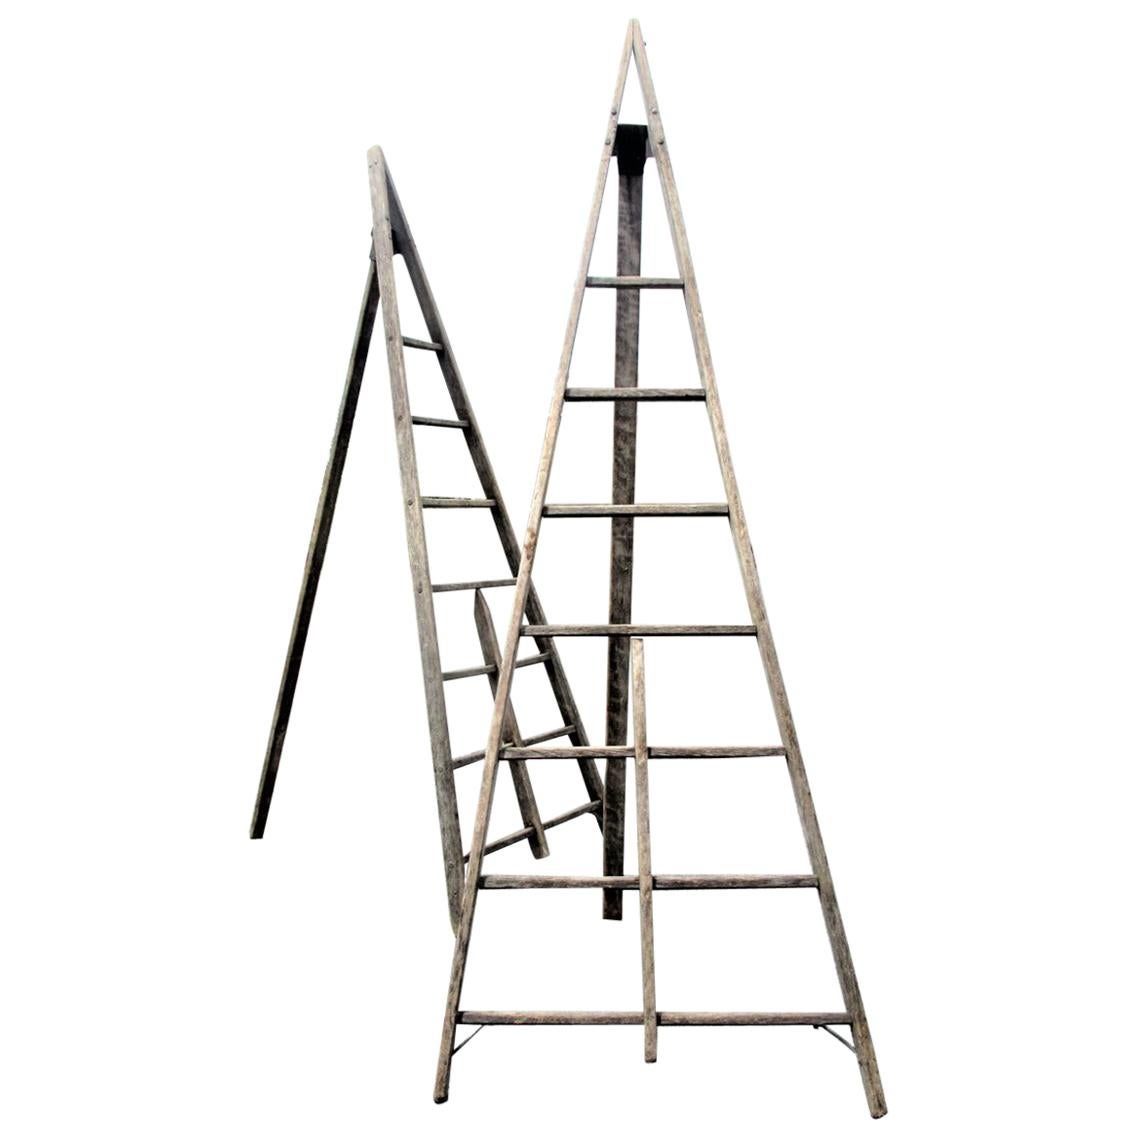 Antique American Wood and Iron A-Frame Peak Top Folding Orchard Ladders